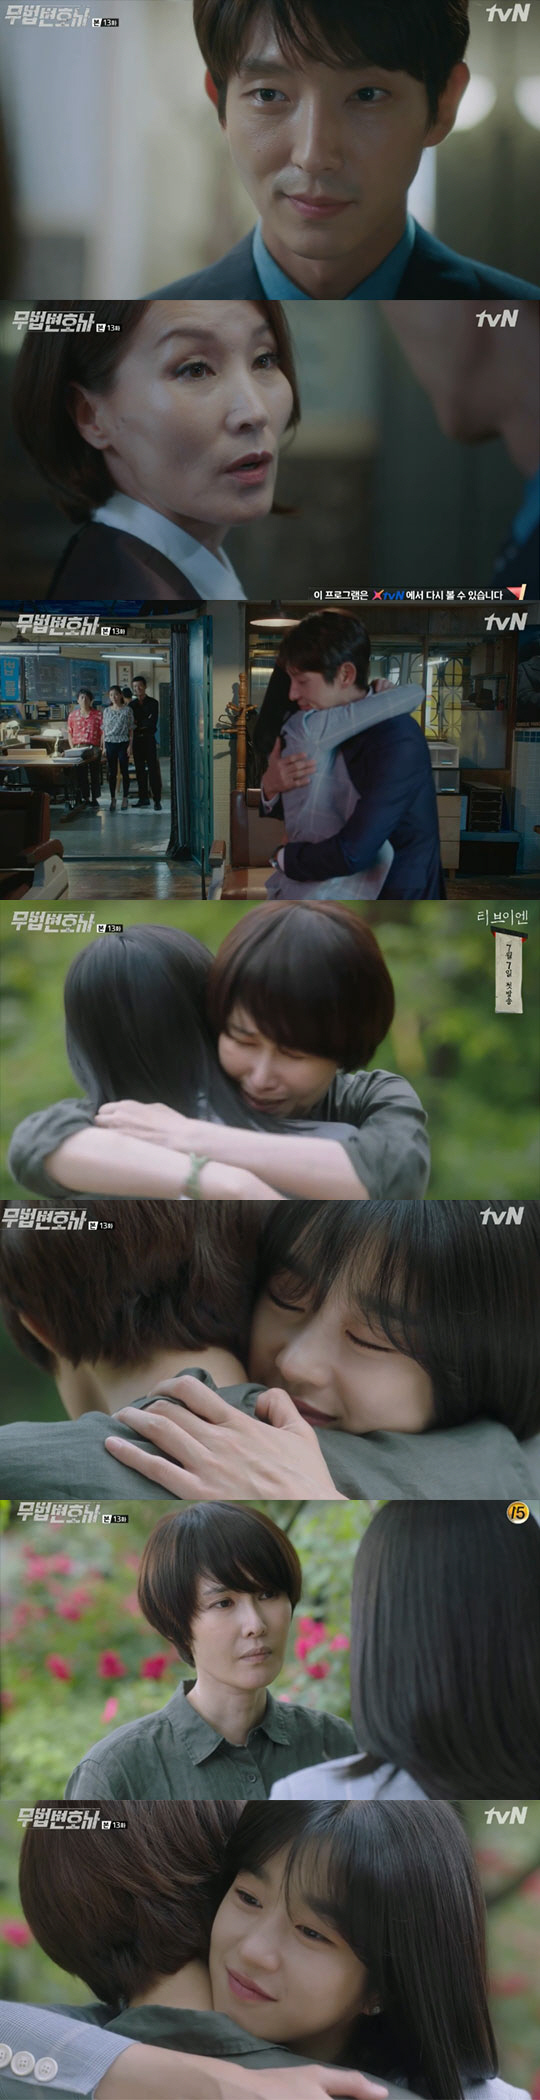 Lawless Lawyer Lee Joon-gi succeeded in tricking Lee Hye-Yeong and taking out Baek Ju-hee.Baek Ju-hee has a tearful reunion with daughter Seo Ye-ji.On the 23rd, TVN Lawless Lawyer showed the reunion of Ha Jae-yi and Baek Ju-hee with the performance of Bong Sang-pil (Lee Joon-gi).Ha Jae-yi met with An-oh-joo and asked about Rohs whereabouts. The chiropractor who worked at the sister of Lee Hye-Yeong also revealed that she was his mother.Hajae said he did not know, If you find my mother, I will defend you. There is no one beside you. If you do not get my help, you will be put on the floor of your life.The only witness to the incident 18 years ago is alive, said An-ju, who was left alone.Bong Sang-pil tried to comfort Ha Jae-yi, but Ha Jae-yi was cold-hearted. Ha Jae-yi asked the factory head (Kim Kwang-gyu) to investigate further about Roh Hyun-joo and Cha Moon-sook.Cha Moon-sook asked Bong Sang-pil, who asked where he hid Noh Hyun-joo, If you have evidence, bring it. Bong Sang-pil said, An innocent person does not say that.I think you have removed all the evidence, he said. People who have come to this room for a while, I do not know who you are.I said, Do not burn in a sense of justice, it will be difficult to get revenge. However, Noh Hyun-joo was secretly protected by Bong Sang-pil.The place where Noh Hyun-joo was held under the direction of Cha Moon-sook and Nam Soon-ja (Yeom Hye-ran) was a nightclub of Kwon Man-bae (Lee Hyun-gul), a traitor who was the second-in-command of Choi For Heroes.Nam Soon-ja told Kwon Man-bae, Are you a new gangster to replace you? Kwon Man-bae said, There is only one person to call my name.But it turned out that Scorpion, who was the third factor of For Heroes, was working with Bong Sang Pil.The scorpion that had previously stabbed Bong Sang-pil was cooperating with Bong Sang-pil after learning the truth about Choi For Heroes (guided).Scorpion hid this fact in front of Hajae by fighting with Bong Sang-pil.In order to avoid the verification of the Supreme Court Chief Justice, Cha Moon-sook ordered Nam Soon-ja to organize the account, while reminding him that the person who recommended Noh Hyun-joo was Nam Soon-ja.Nam Soon-ja, along with his daughter Kang Yeon-hee (Cha Jung-won), vowed allegiance to Cha Moon-sook while directing Kwon Man-bae to kill Noh Hyun-joo, saying, My words are the words of the judge.Kwon Man-bae recorded this image and reported it to Cha Moon-sook. Cha Moon-sook laughed, saying, What is king in a mountain without a tiger?Ahn Oh-ju, who was running away from the police, refused to arrest him, took only Seokgwan-dong (Choi Dae-hoon) and Kims secretary to attack Kwon Man-bae to rescue Roh Hyun-joo.Kwon Man-bae quickly ordered Noh Hyun-joo to fall into the sea through a scorpion, and reported to Cha Moon-sook that he was well finished.However, the scorpion secretly took out Noh Hyun-joo and made him meet Bong Sang-pil - Ha Jae-yi.Ha Jae-yi and Noh Hyun-joo expressed their gratitude to Bong Sang-pil after the reunion of the tears. Bong Sang-pil told Noh Hyun-joo, My mother, who was the only witness of the Murder case 18 years ago, is dead again.Cha Moon-suk will definitely send Nam Soon-ja. I intend to use Noh Hyun-joo as a card of the spleen to shoot Cha Moon-suk in the decisive scene.Ha Jae-yi described Cha Moon-sook is to kill his past (using Bong Sang-pil) and force himself to make the future.Cha Moon-sook reported the video of the Murder teacher to the prosecution, and Nam Soon-ja was arrested with handcuffs on the way to Kang Yeon-hees work.Jang Sang-ik (Park Jung-hak) issued an arrest warrant for An-oh-joo on charges of Murder teacher. An-oh-joo went into hiding, pledging revenge against Cha Moon-sook and Bong Sang-pil.Bong Sang-pil visited Cha Moon-sook and said, I am writing your notebook well. Cha Moon-sook said, There is one thing I did not expect.I will catch your ankle. But Bong Sang-pil laughed, saying, The opposite. 